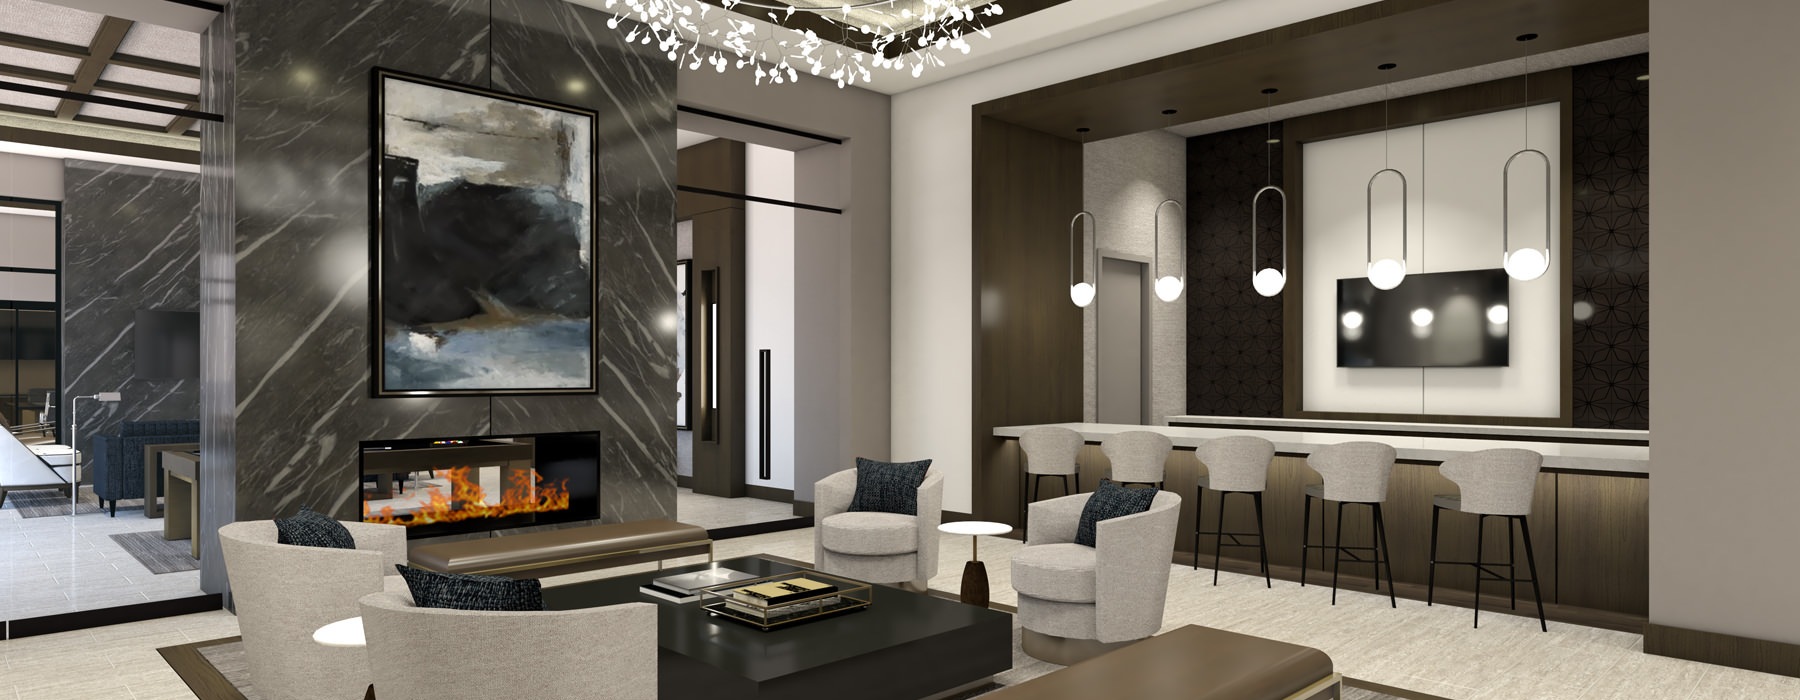 luxurious lobby with fireside seating and billiards table